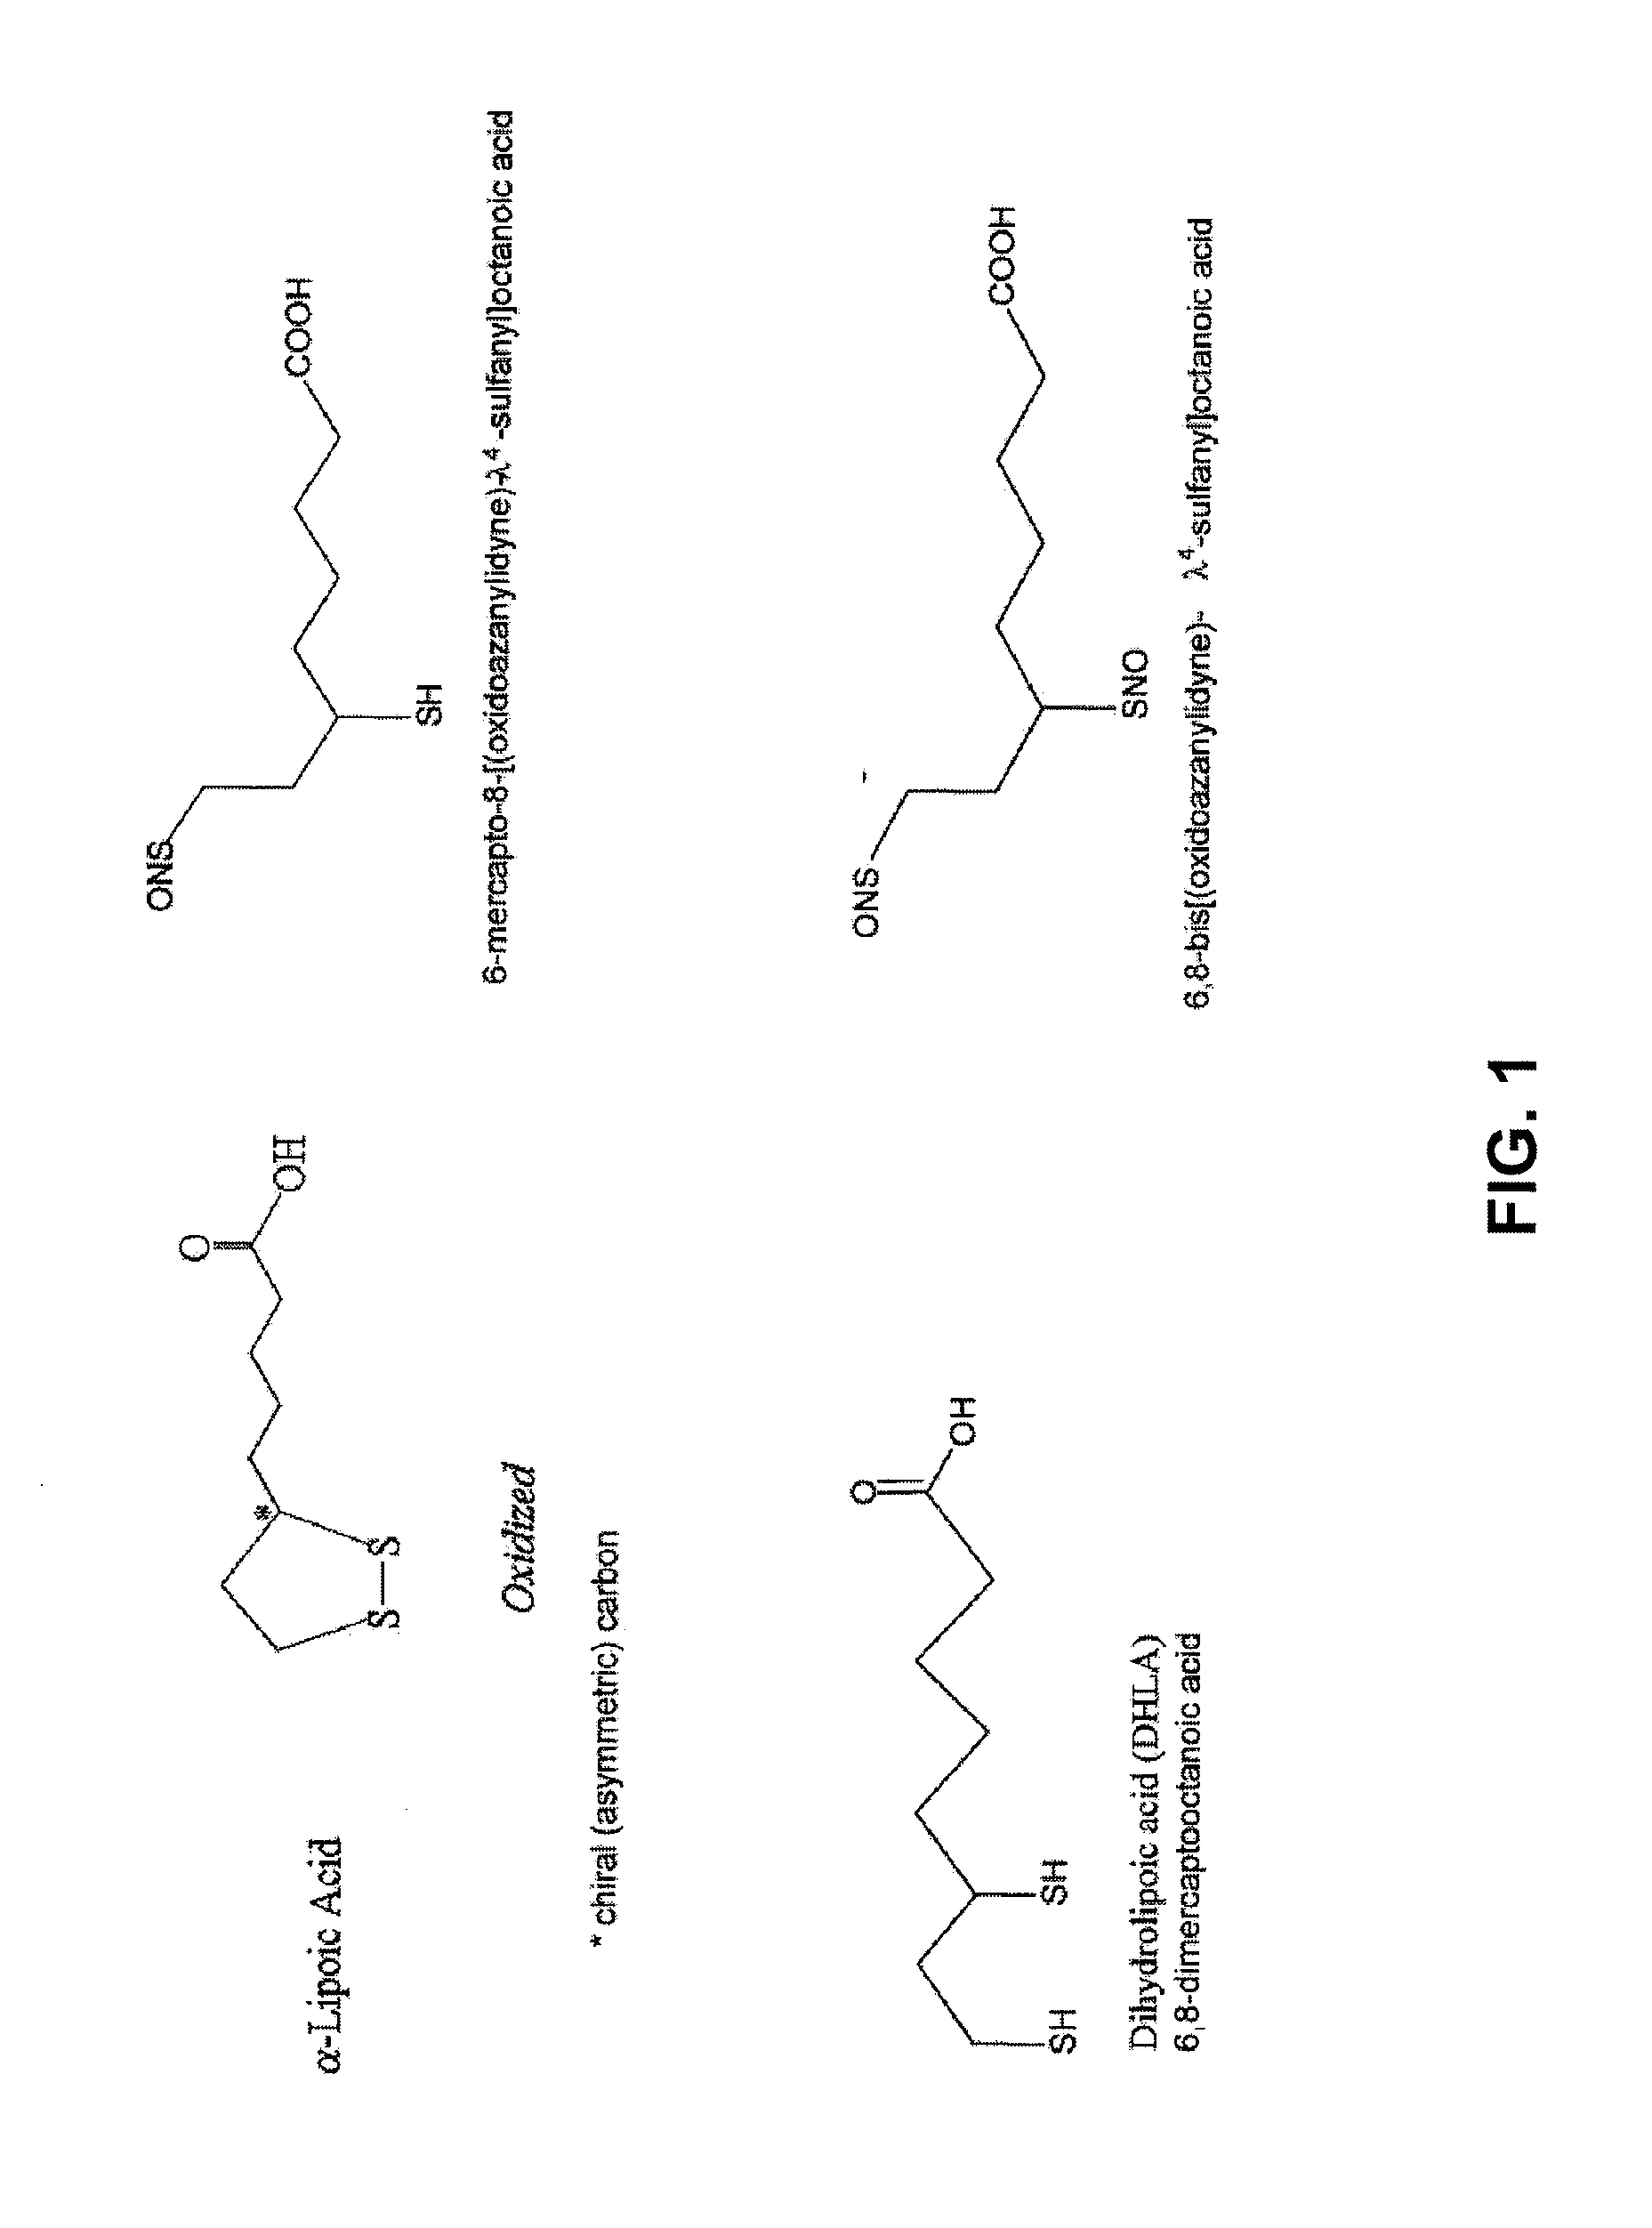 Dihydrolipoic Acid Derivatives Comprising Nitric Oxide and Therapeutic Uses Thereof